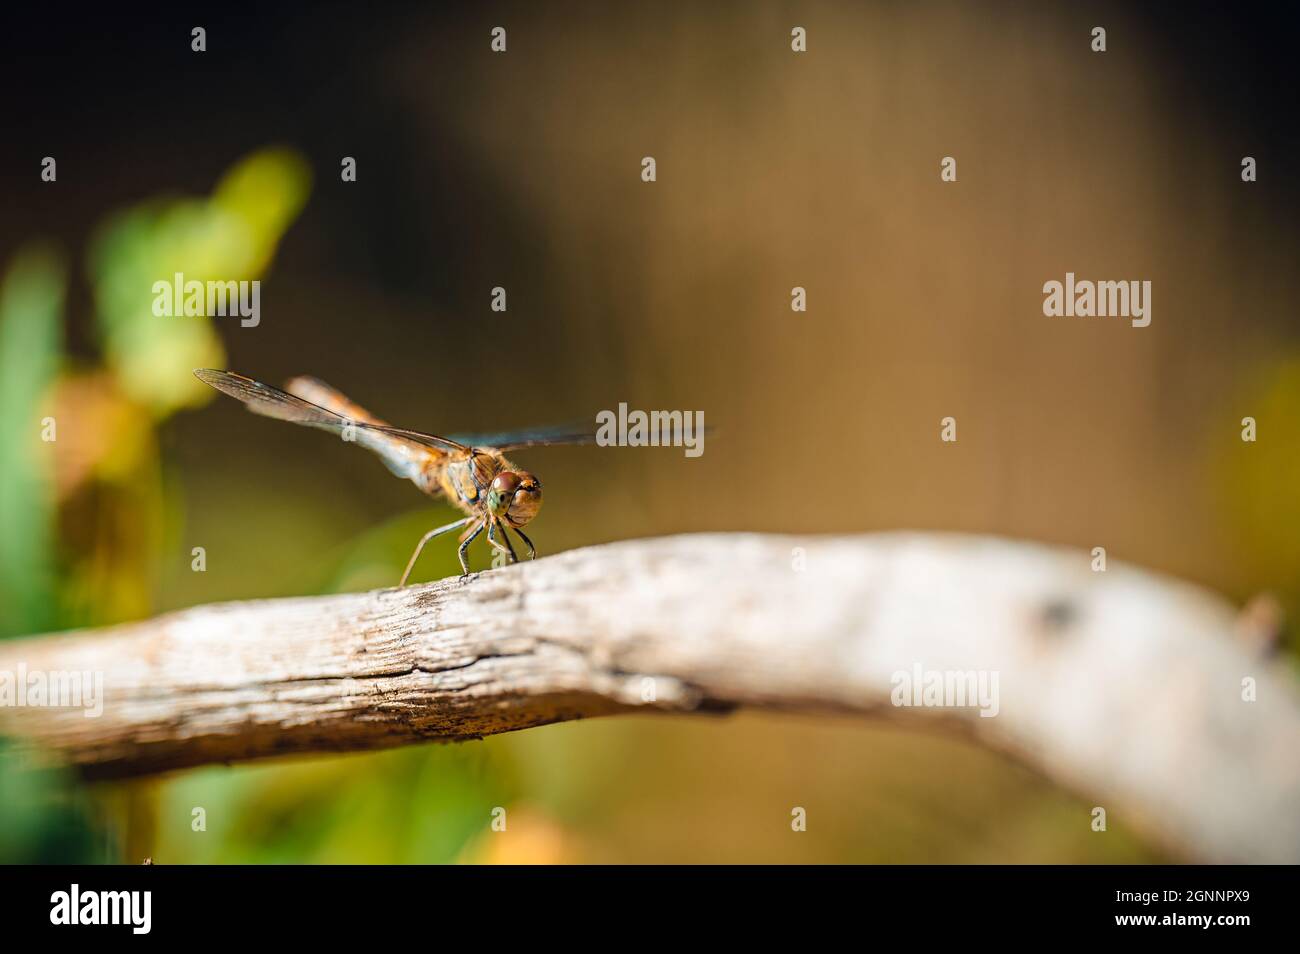 Small cute dragonfly the common darter (Sympetrum striolatum) sitting on a branch. Autumn colors on background. Stock Photo